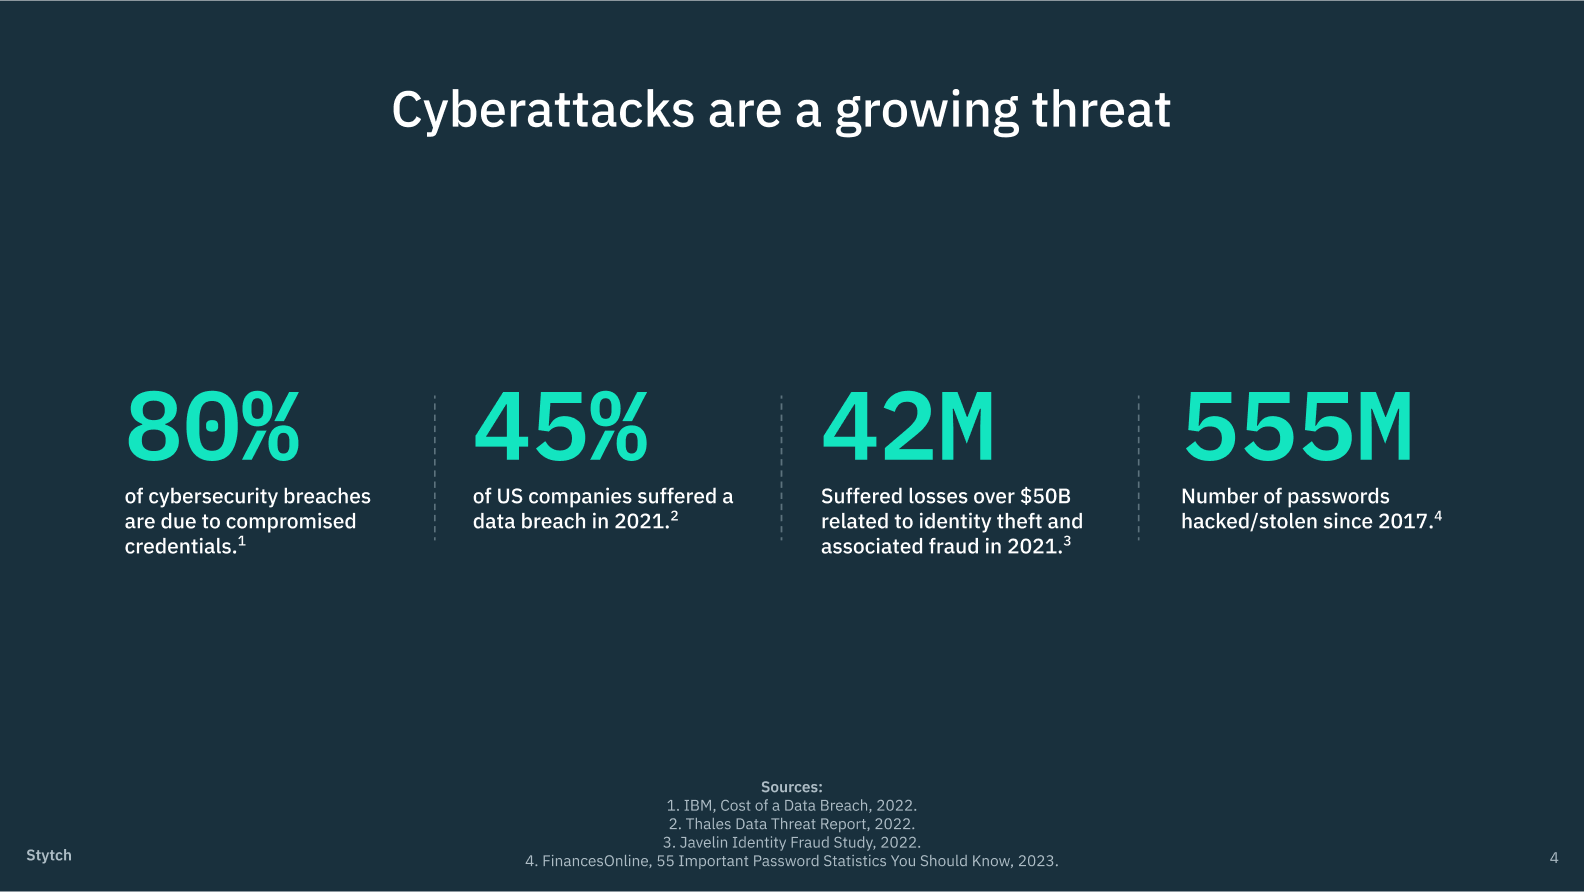 A graphic showing the increasing threat of cyberattacks